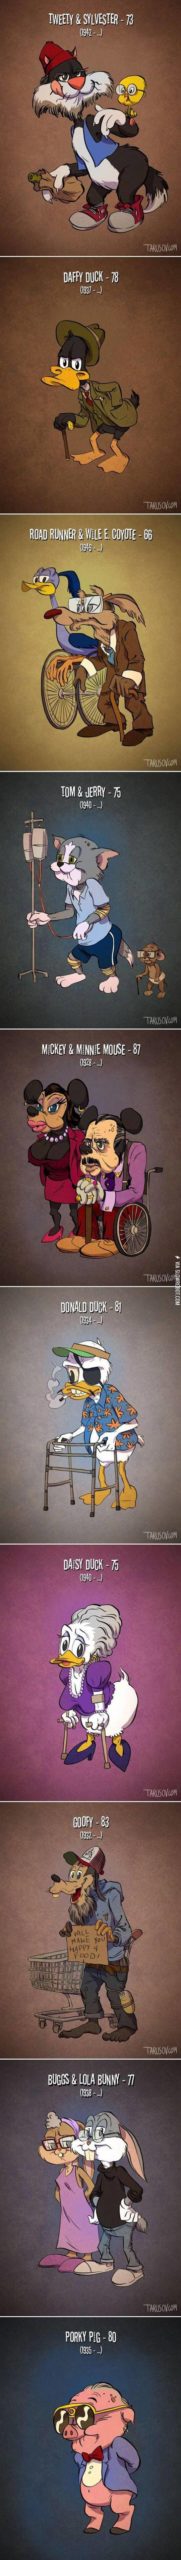 If+Cartoon+Characters+Looked+Their+Actual+Age